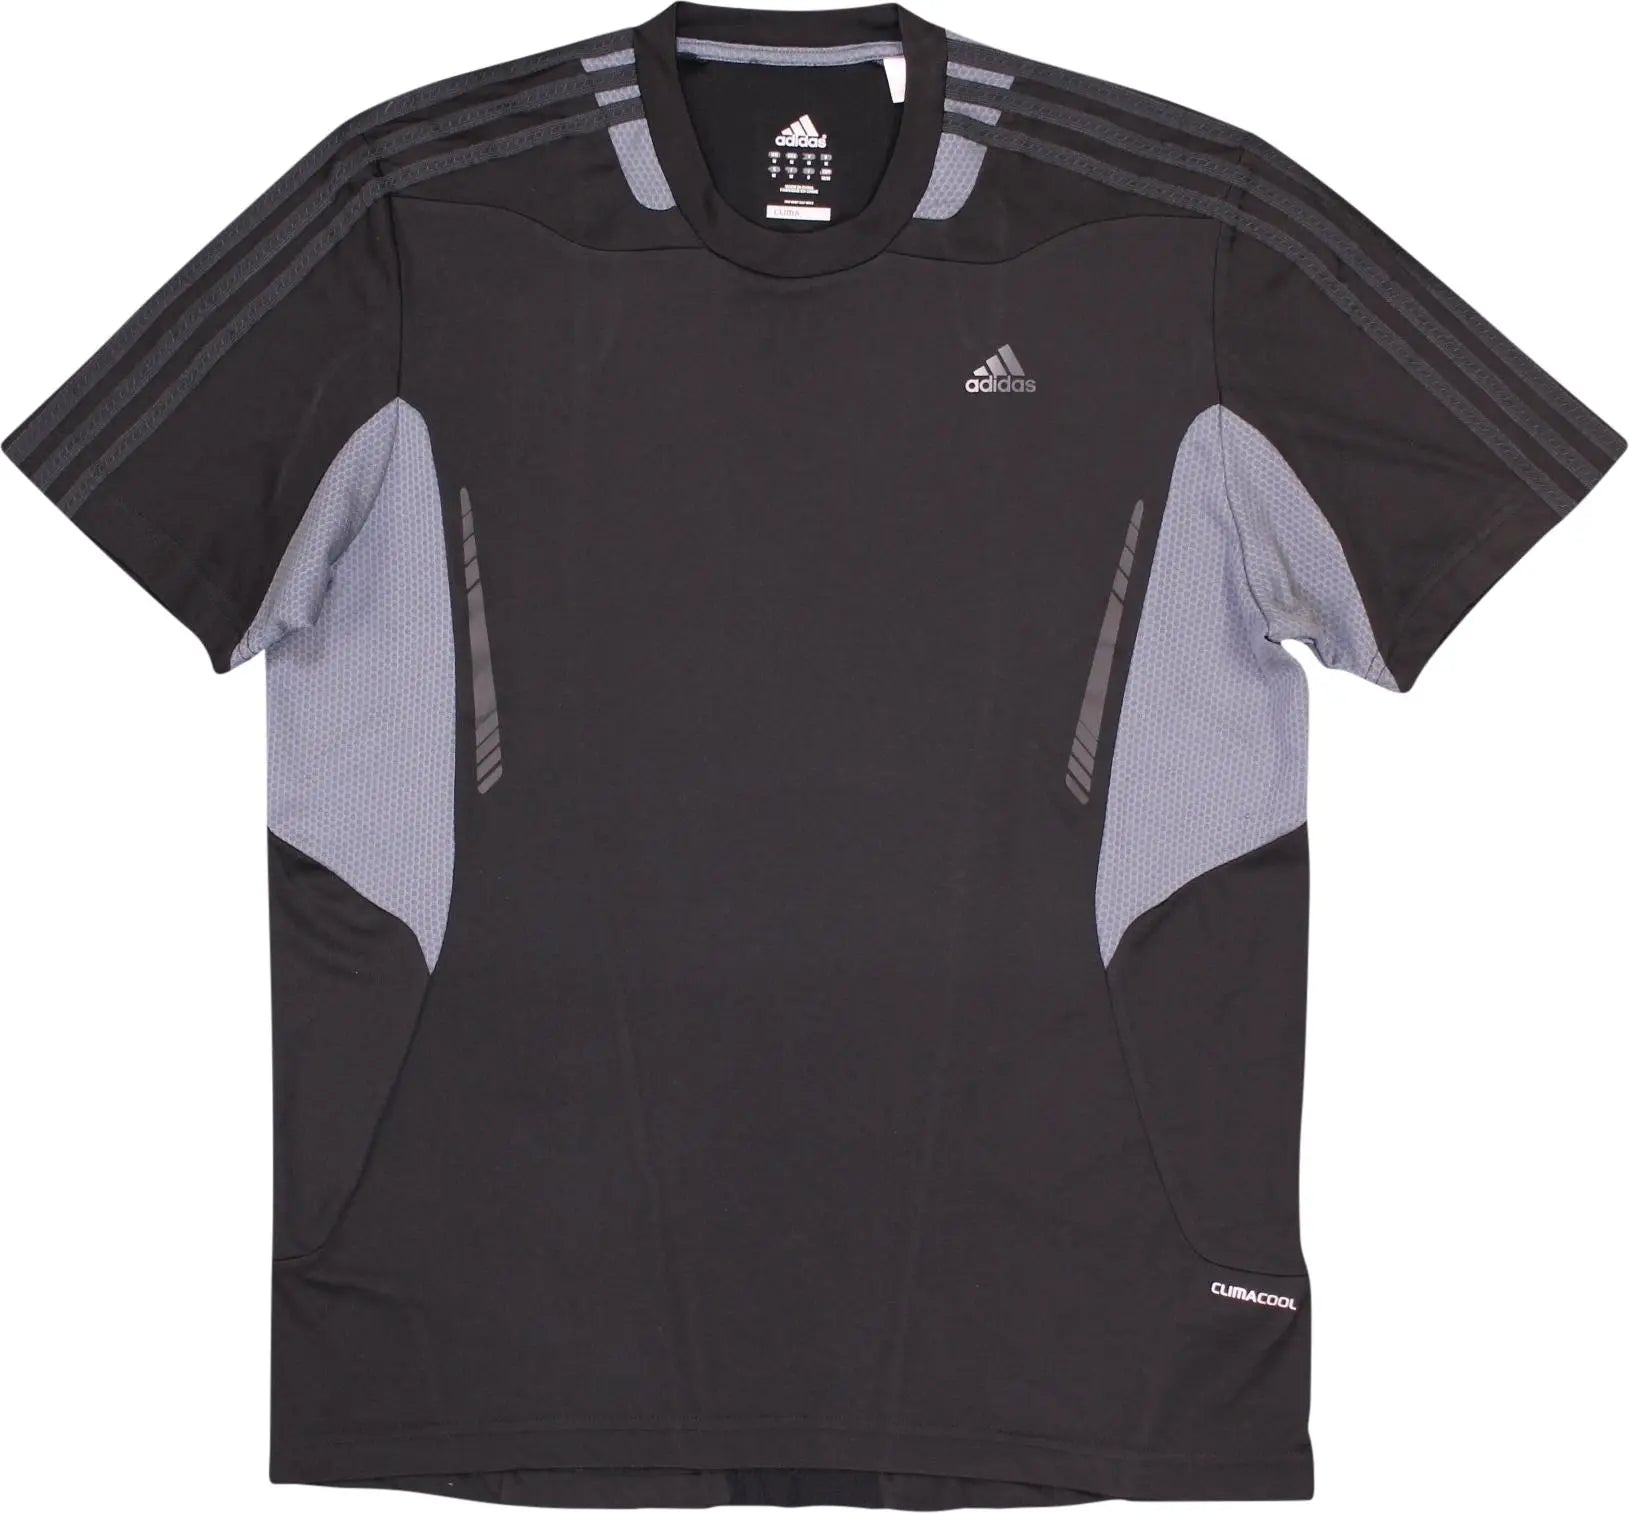 Adidas - Black T-shirt by Adidas- ThriftTale.com - Vintage and second handclothing